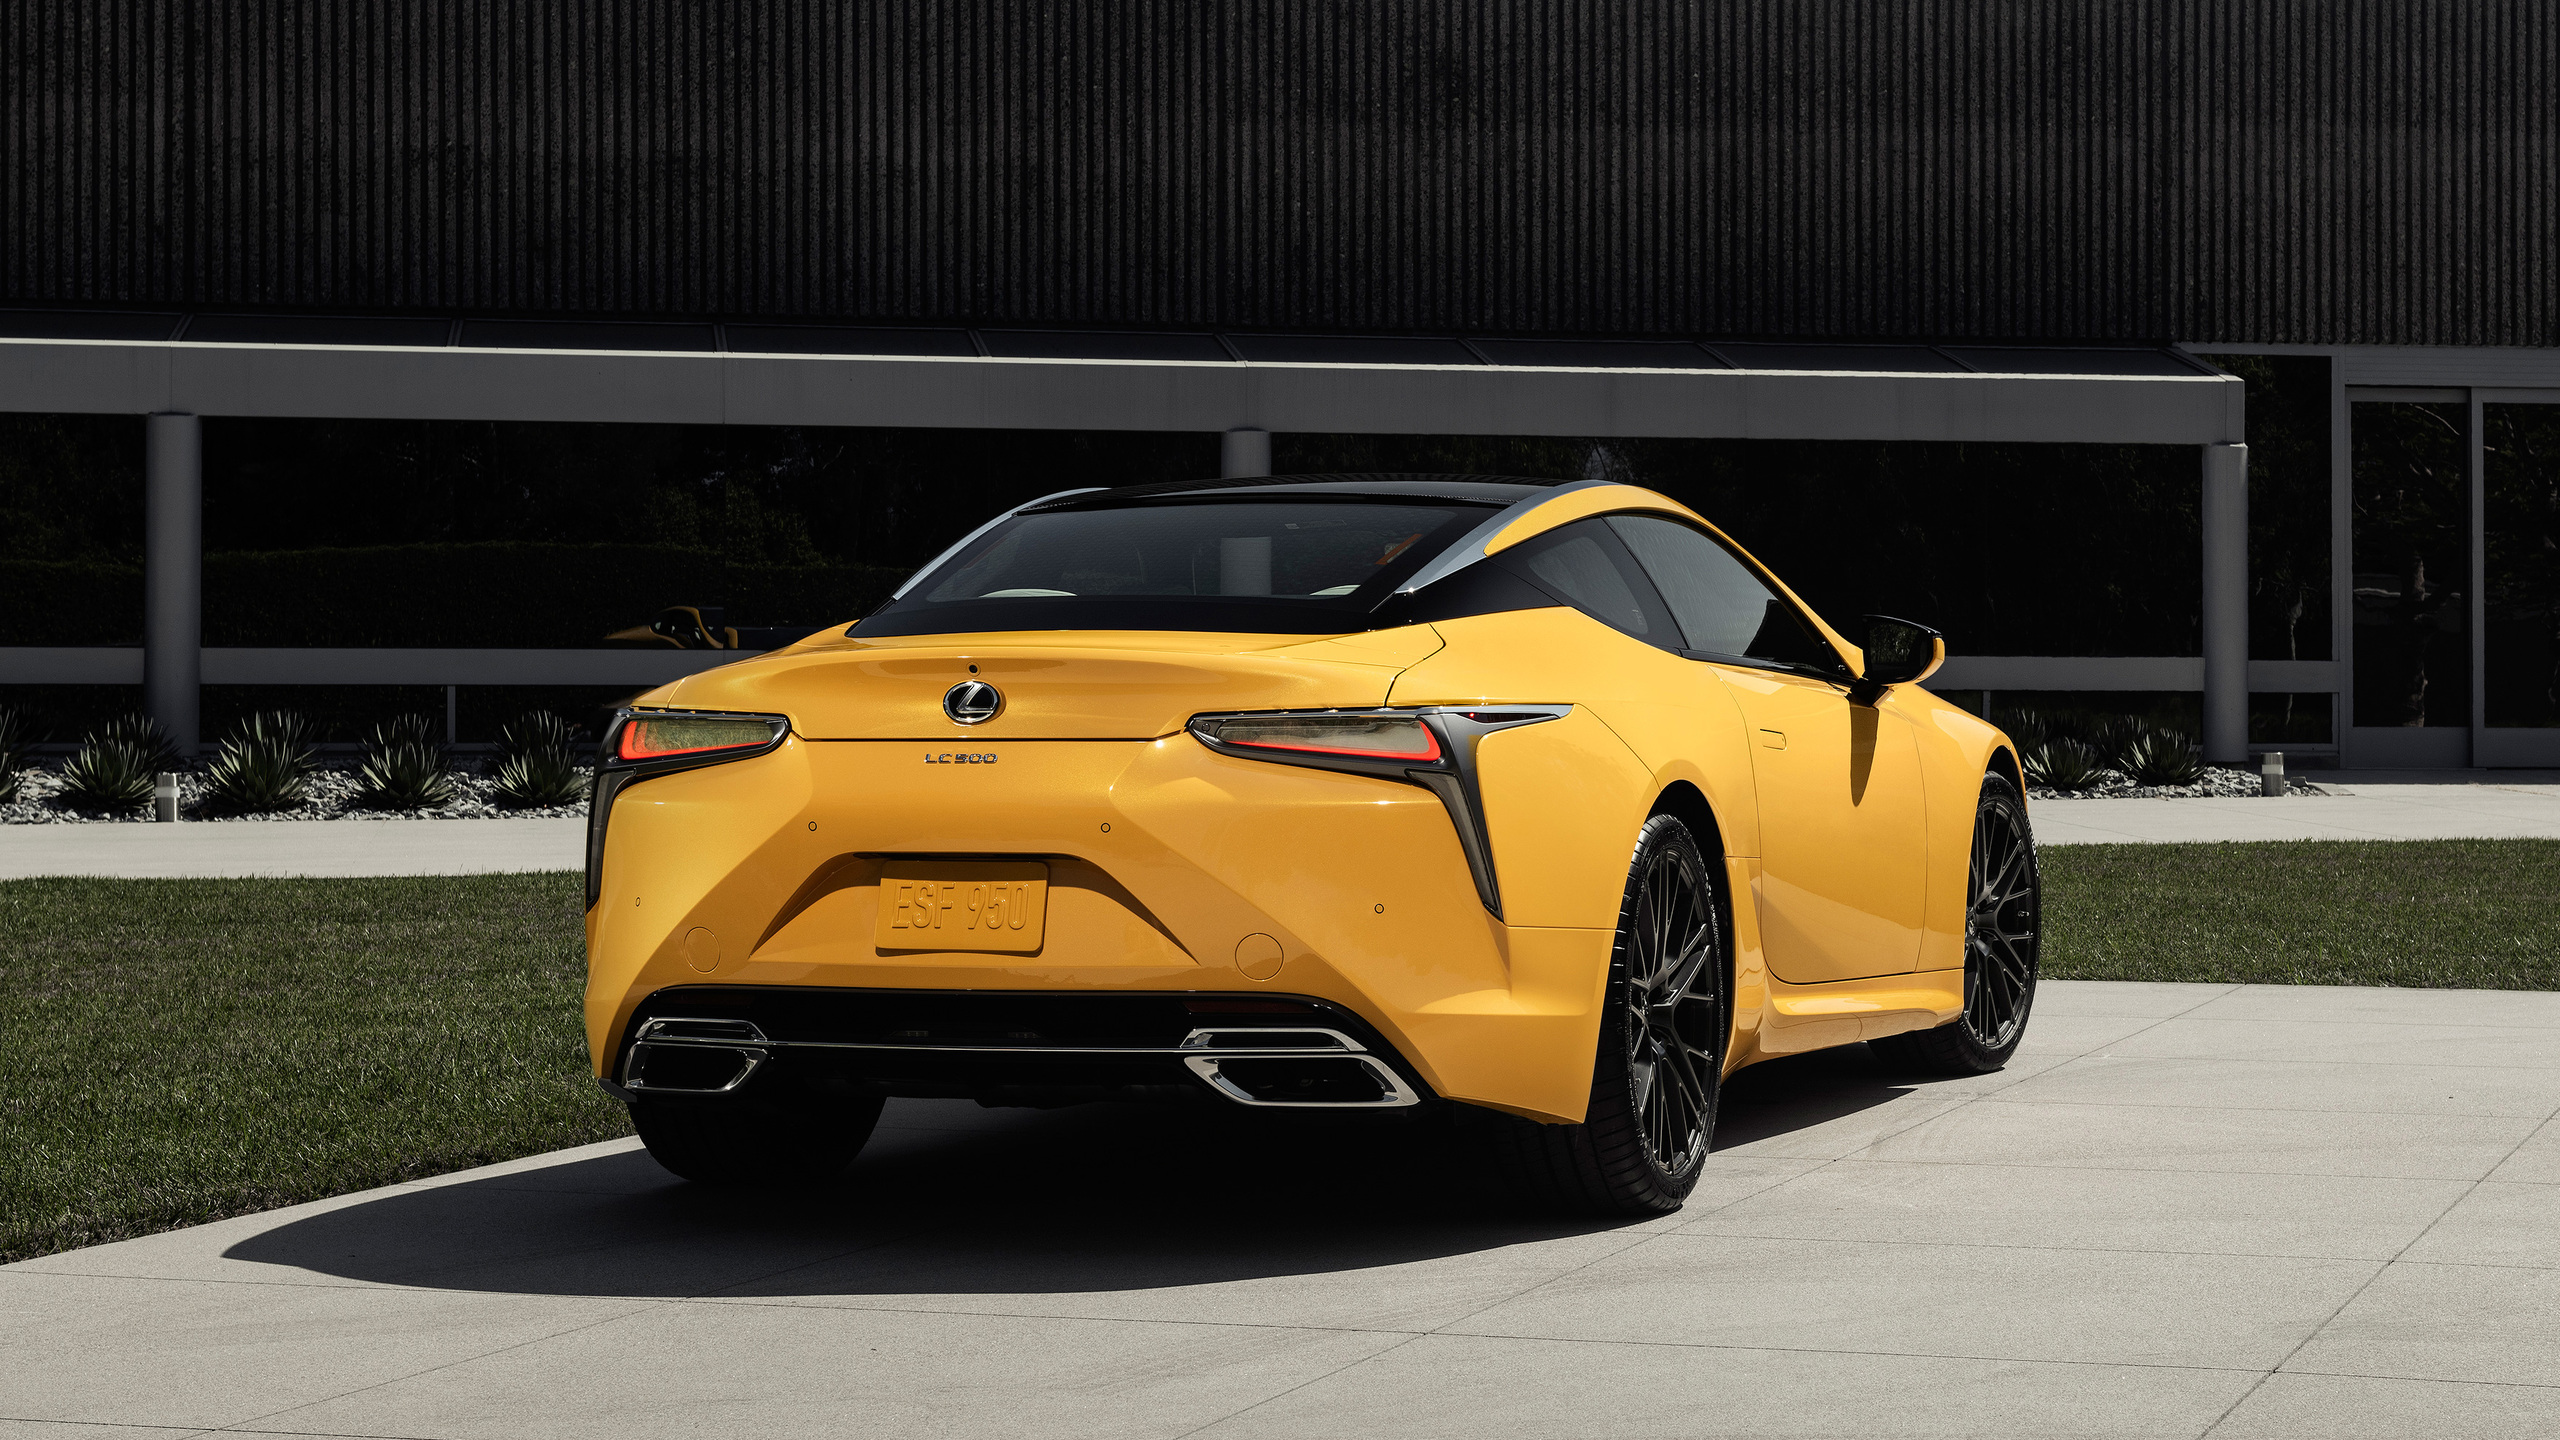 2560x1440 2019 Lexus LC 500 Inspiration Concept Rear 1440P Resolution HD 4k  Wallpapers, Images, Backgrounds, Photos and Pictures